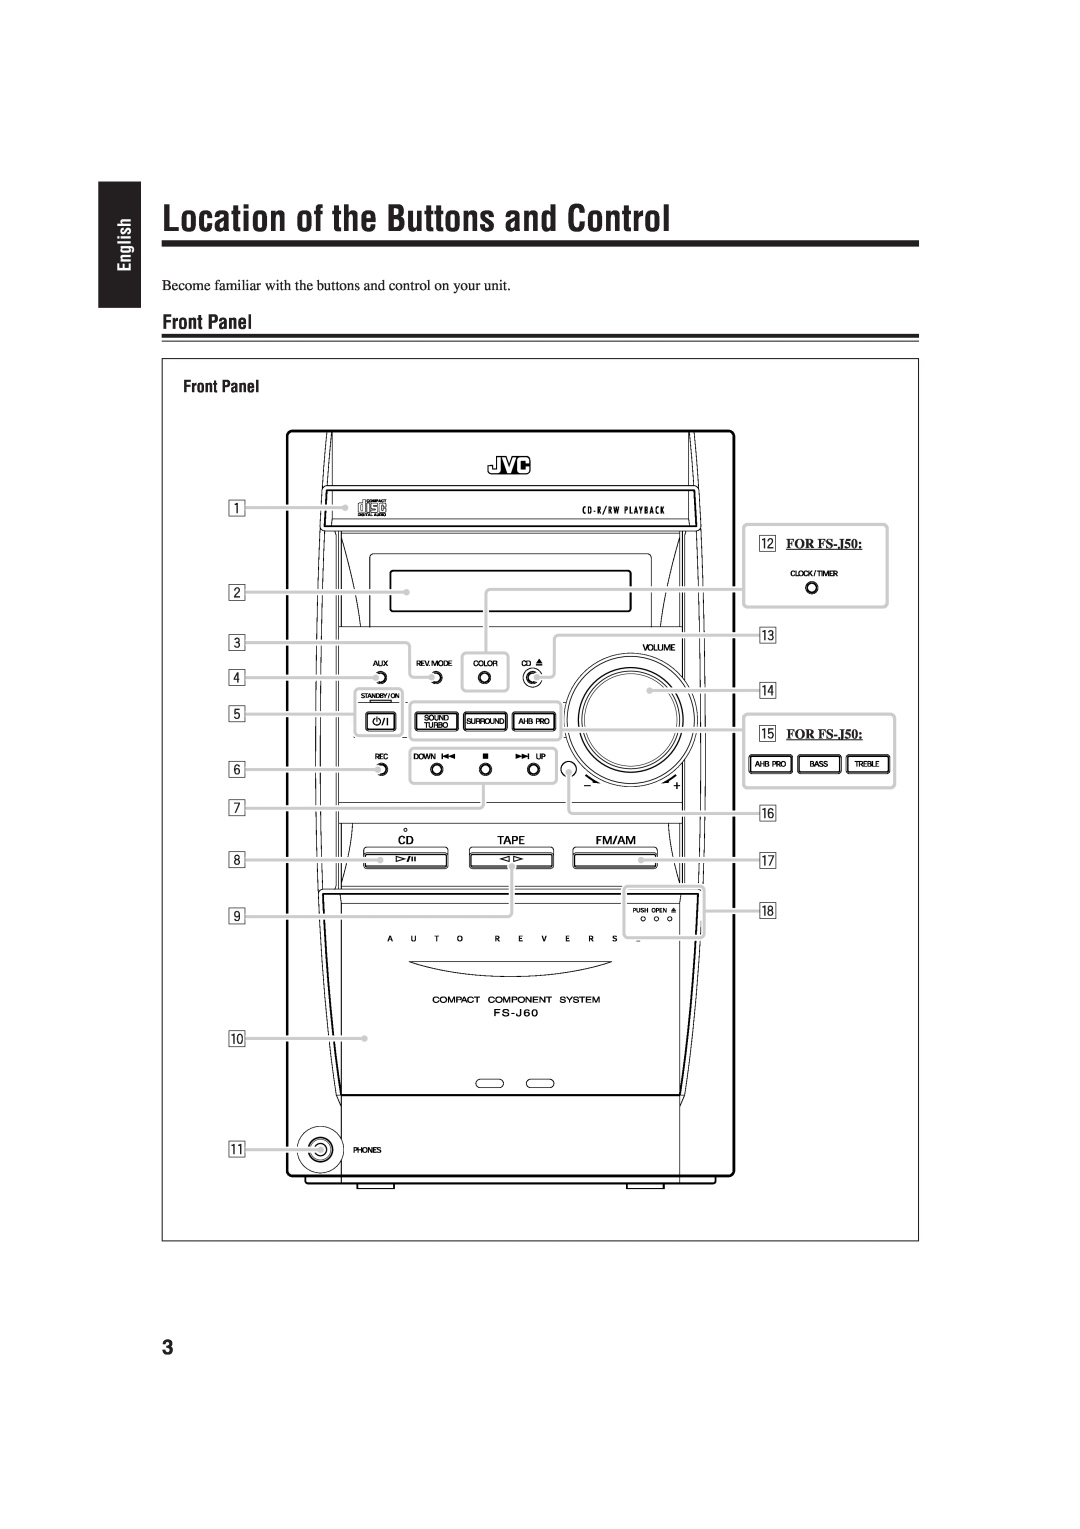 JVC FS-J60 manual Location of the Buttons and Control, Front Panel, English, w FOR FS-J50, t FOR FS-J50, F S - J 